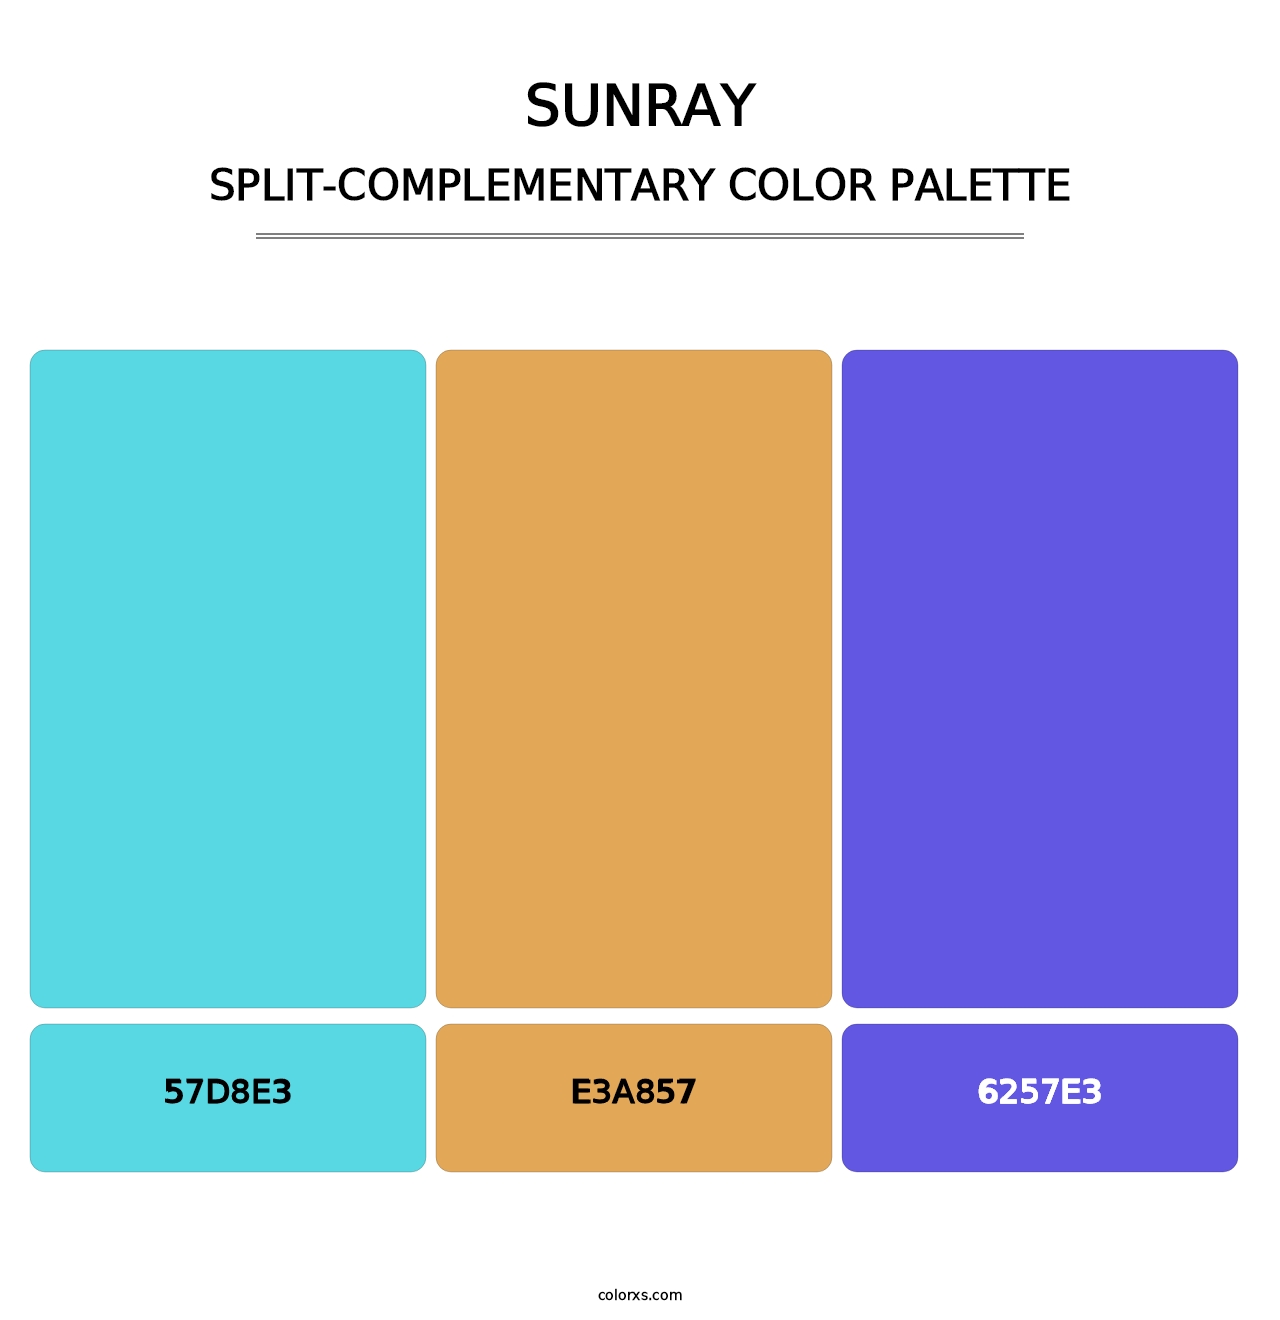 Sunray - Split-Complementary Color Palette